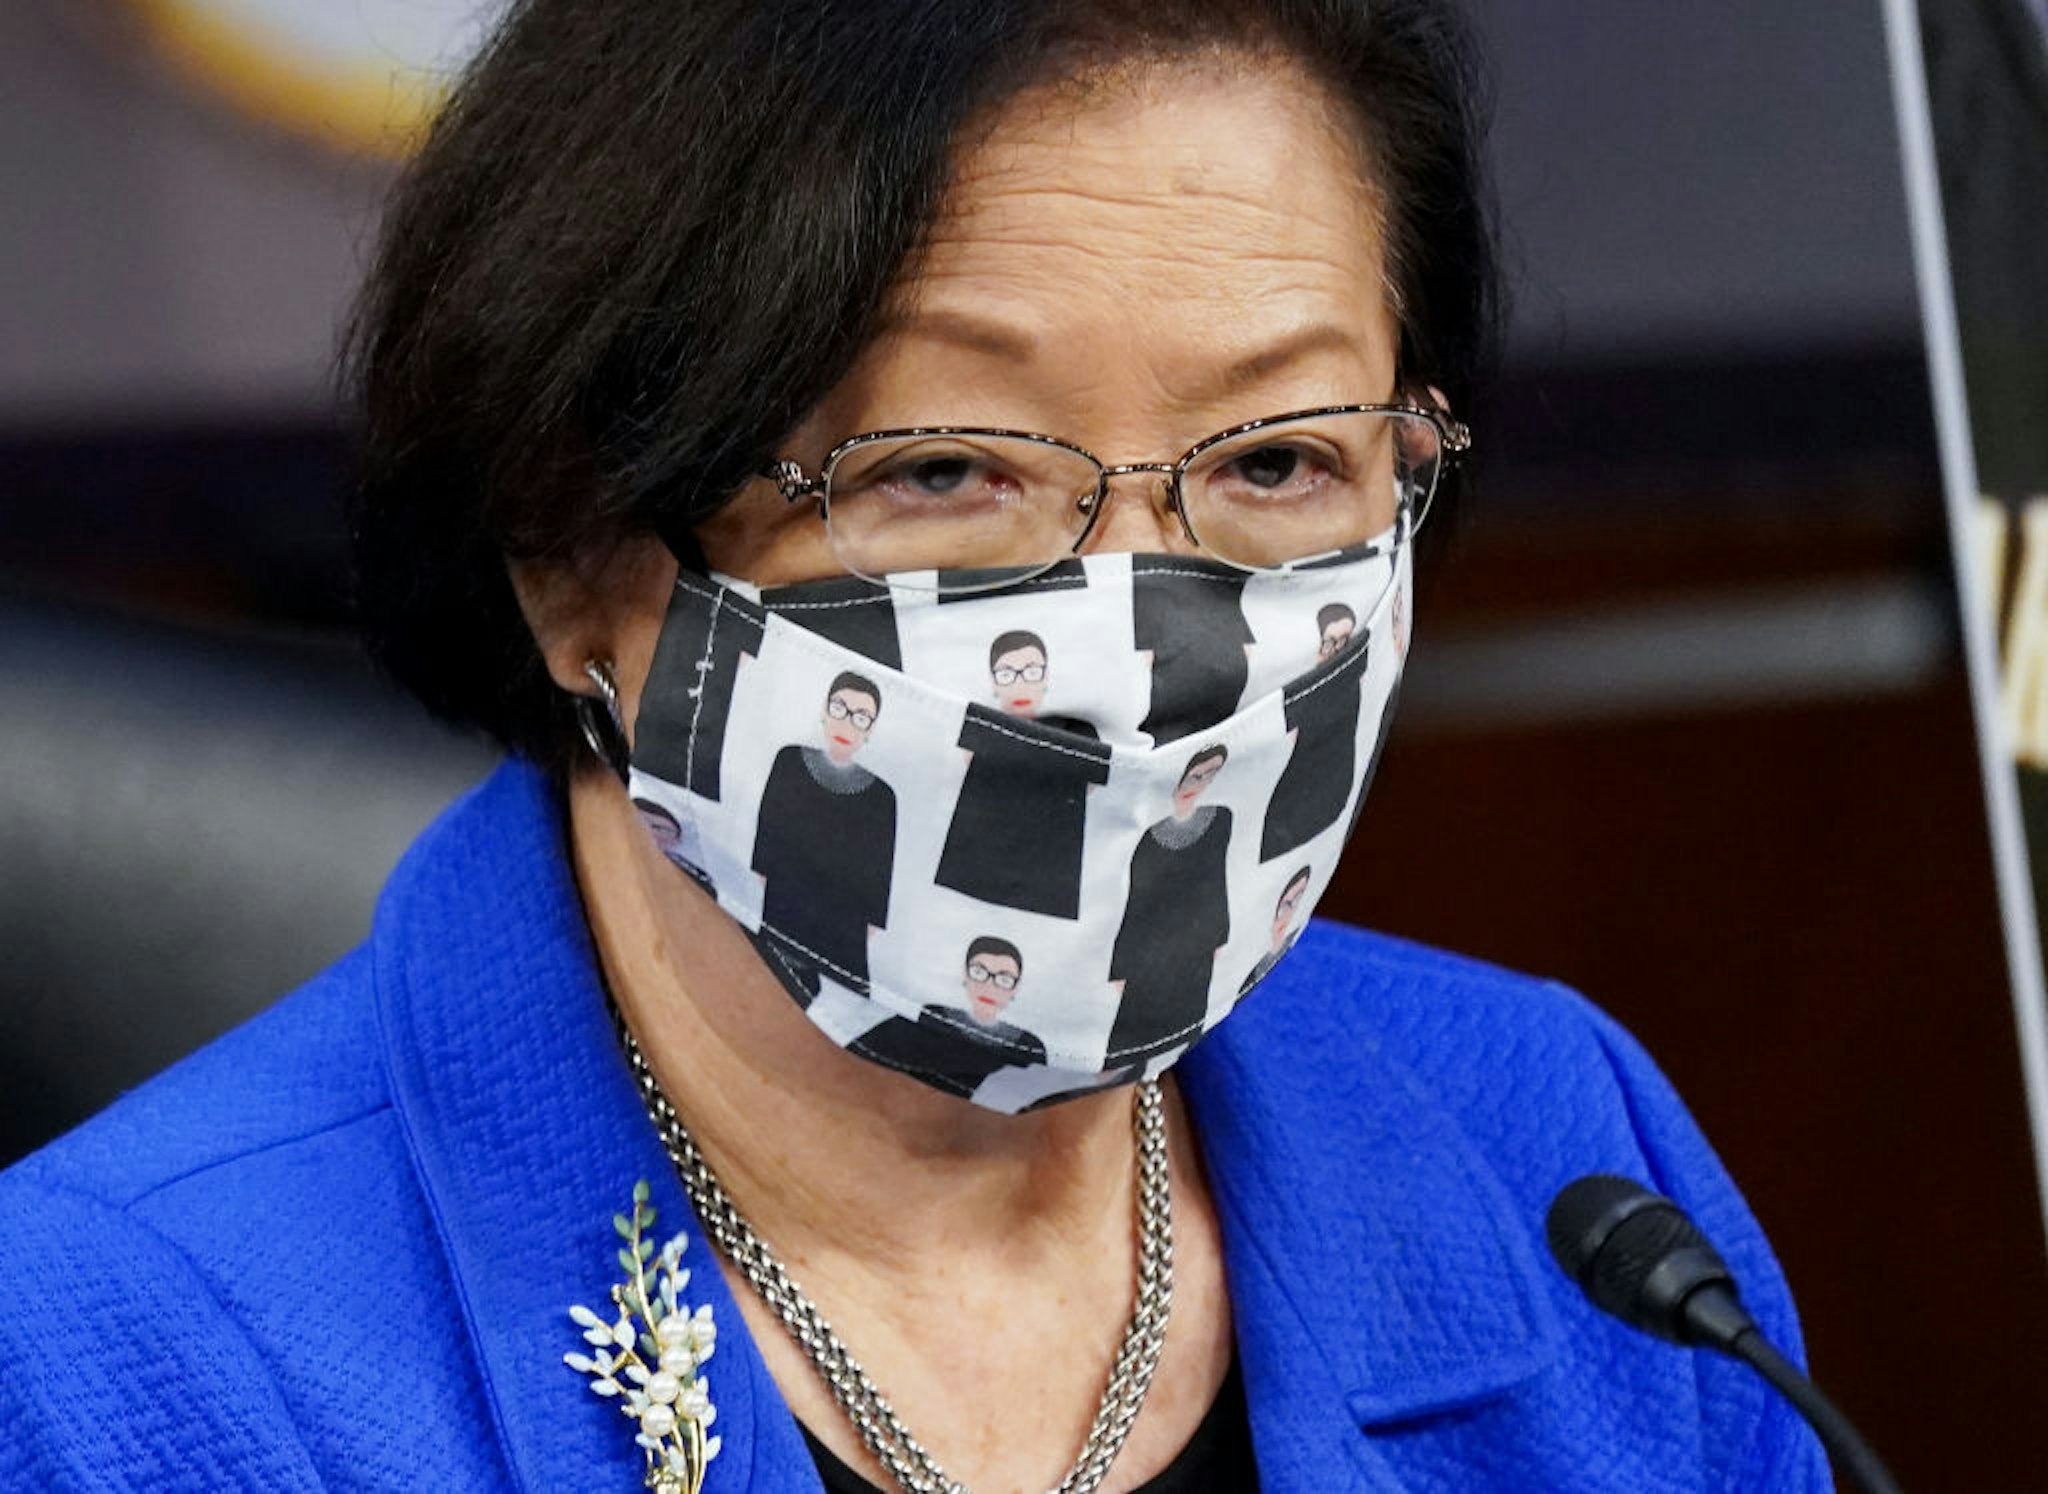 U.S. Sen. Mazi Hirono (D-HI) wears a Ruth Bader Ginsburg face mask during the Senate Judiciary Committee confirmation hearing for Supreme Court Justice on Capitol Hill on October 12, 2020 in Washington, DC.